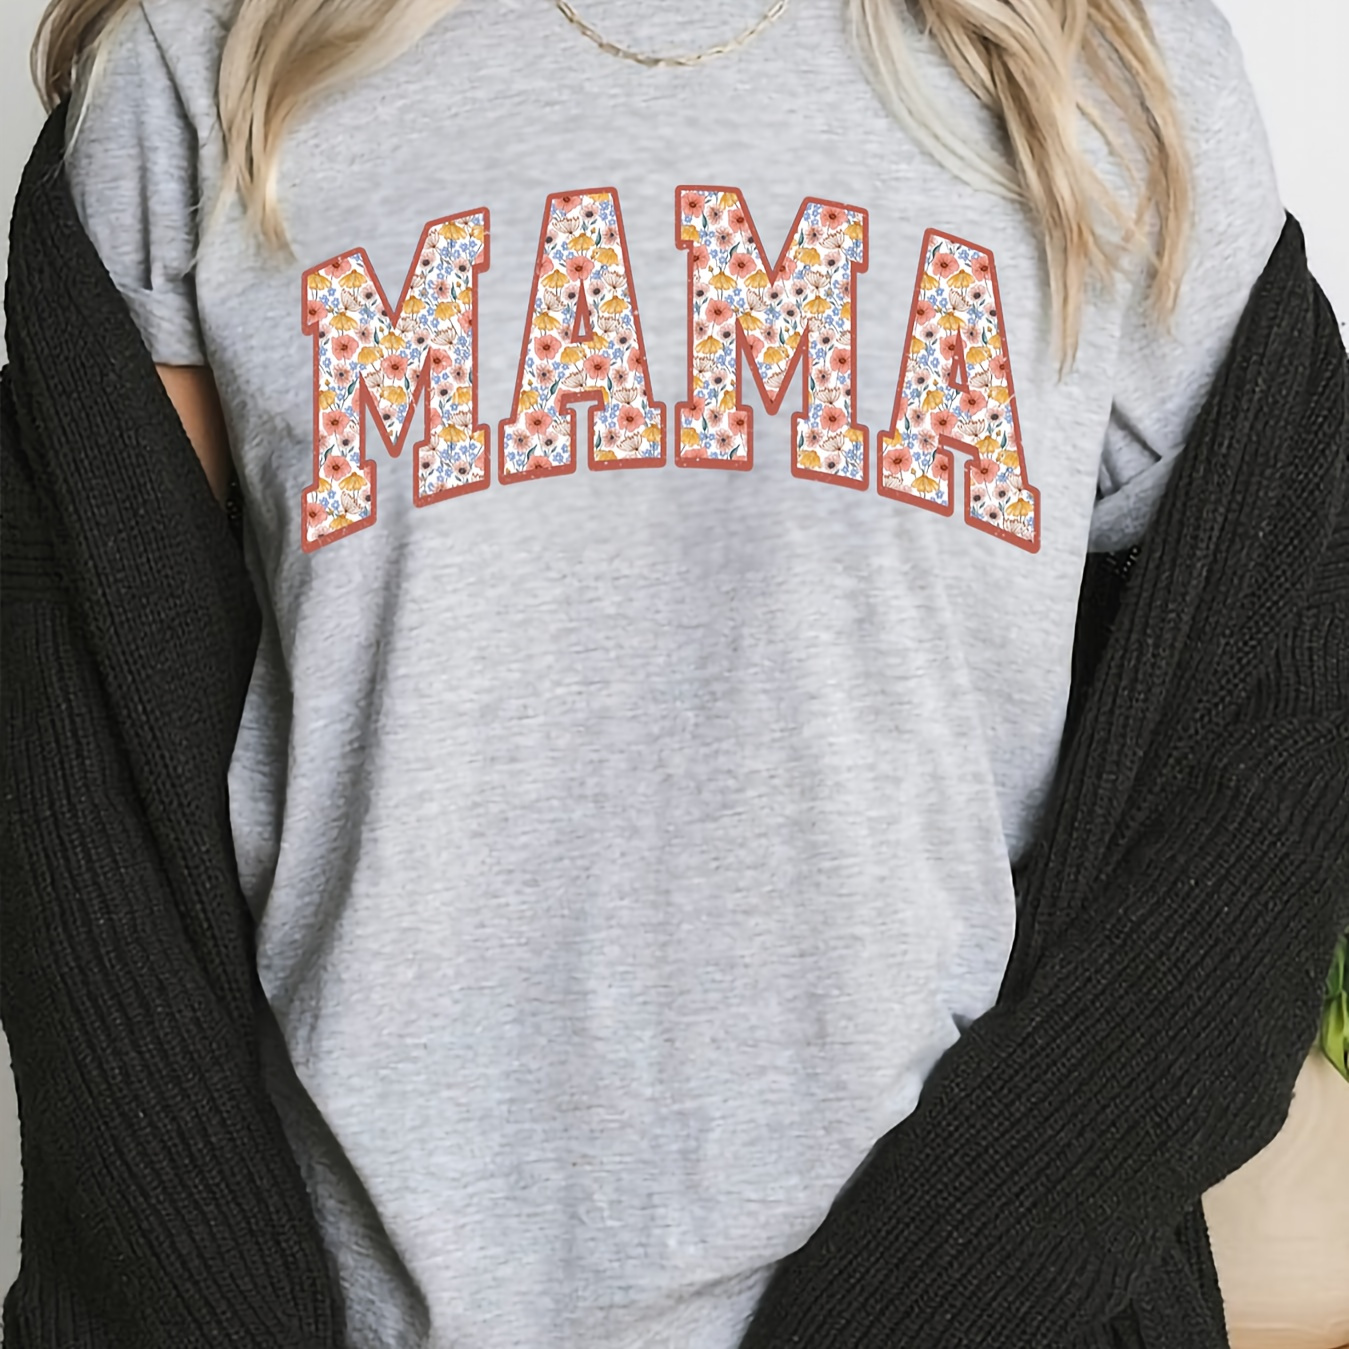 

Mama Letter Print T-shirt, Short Sleeve Crew Neck Casual Top For Summer & Spring, Women's Clothing